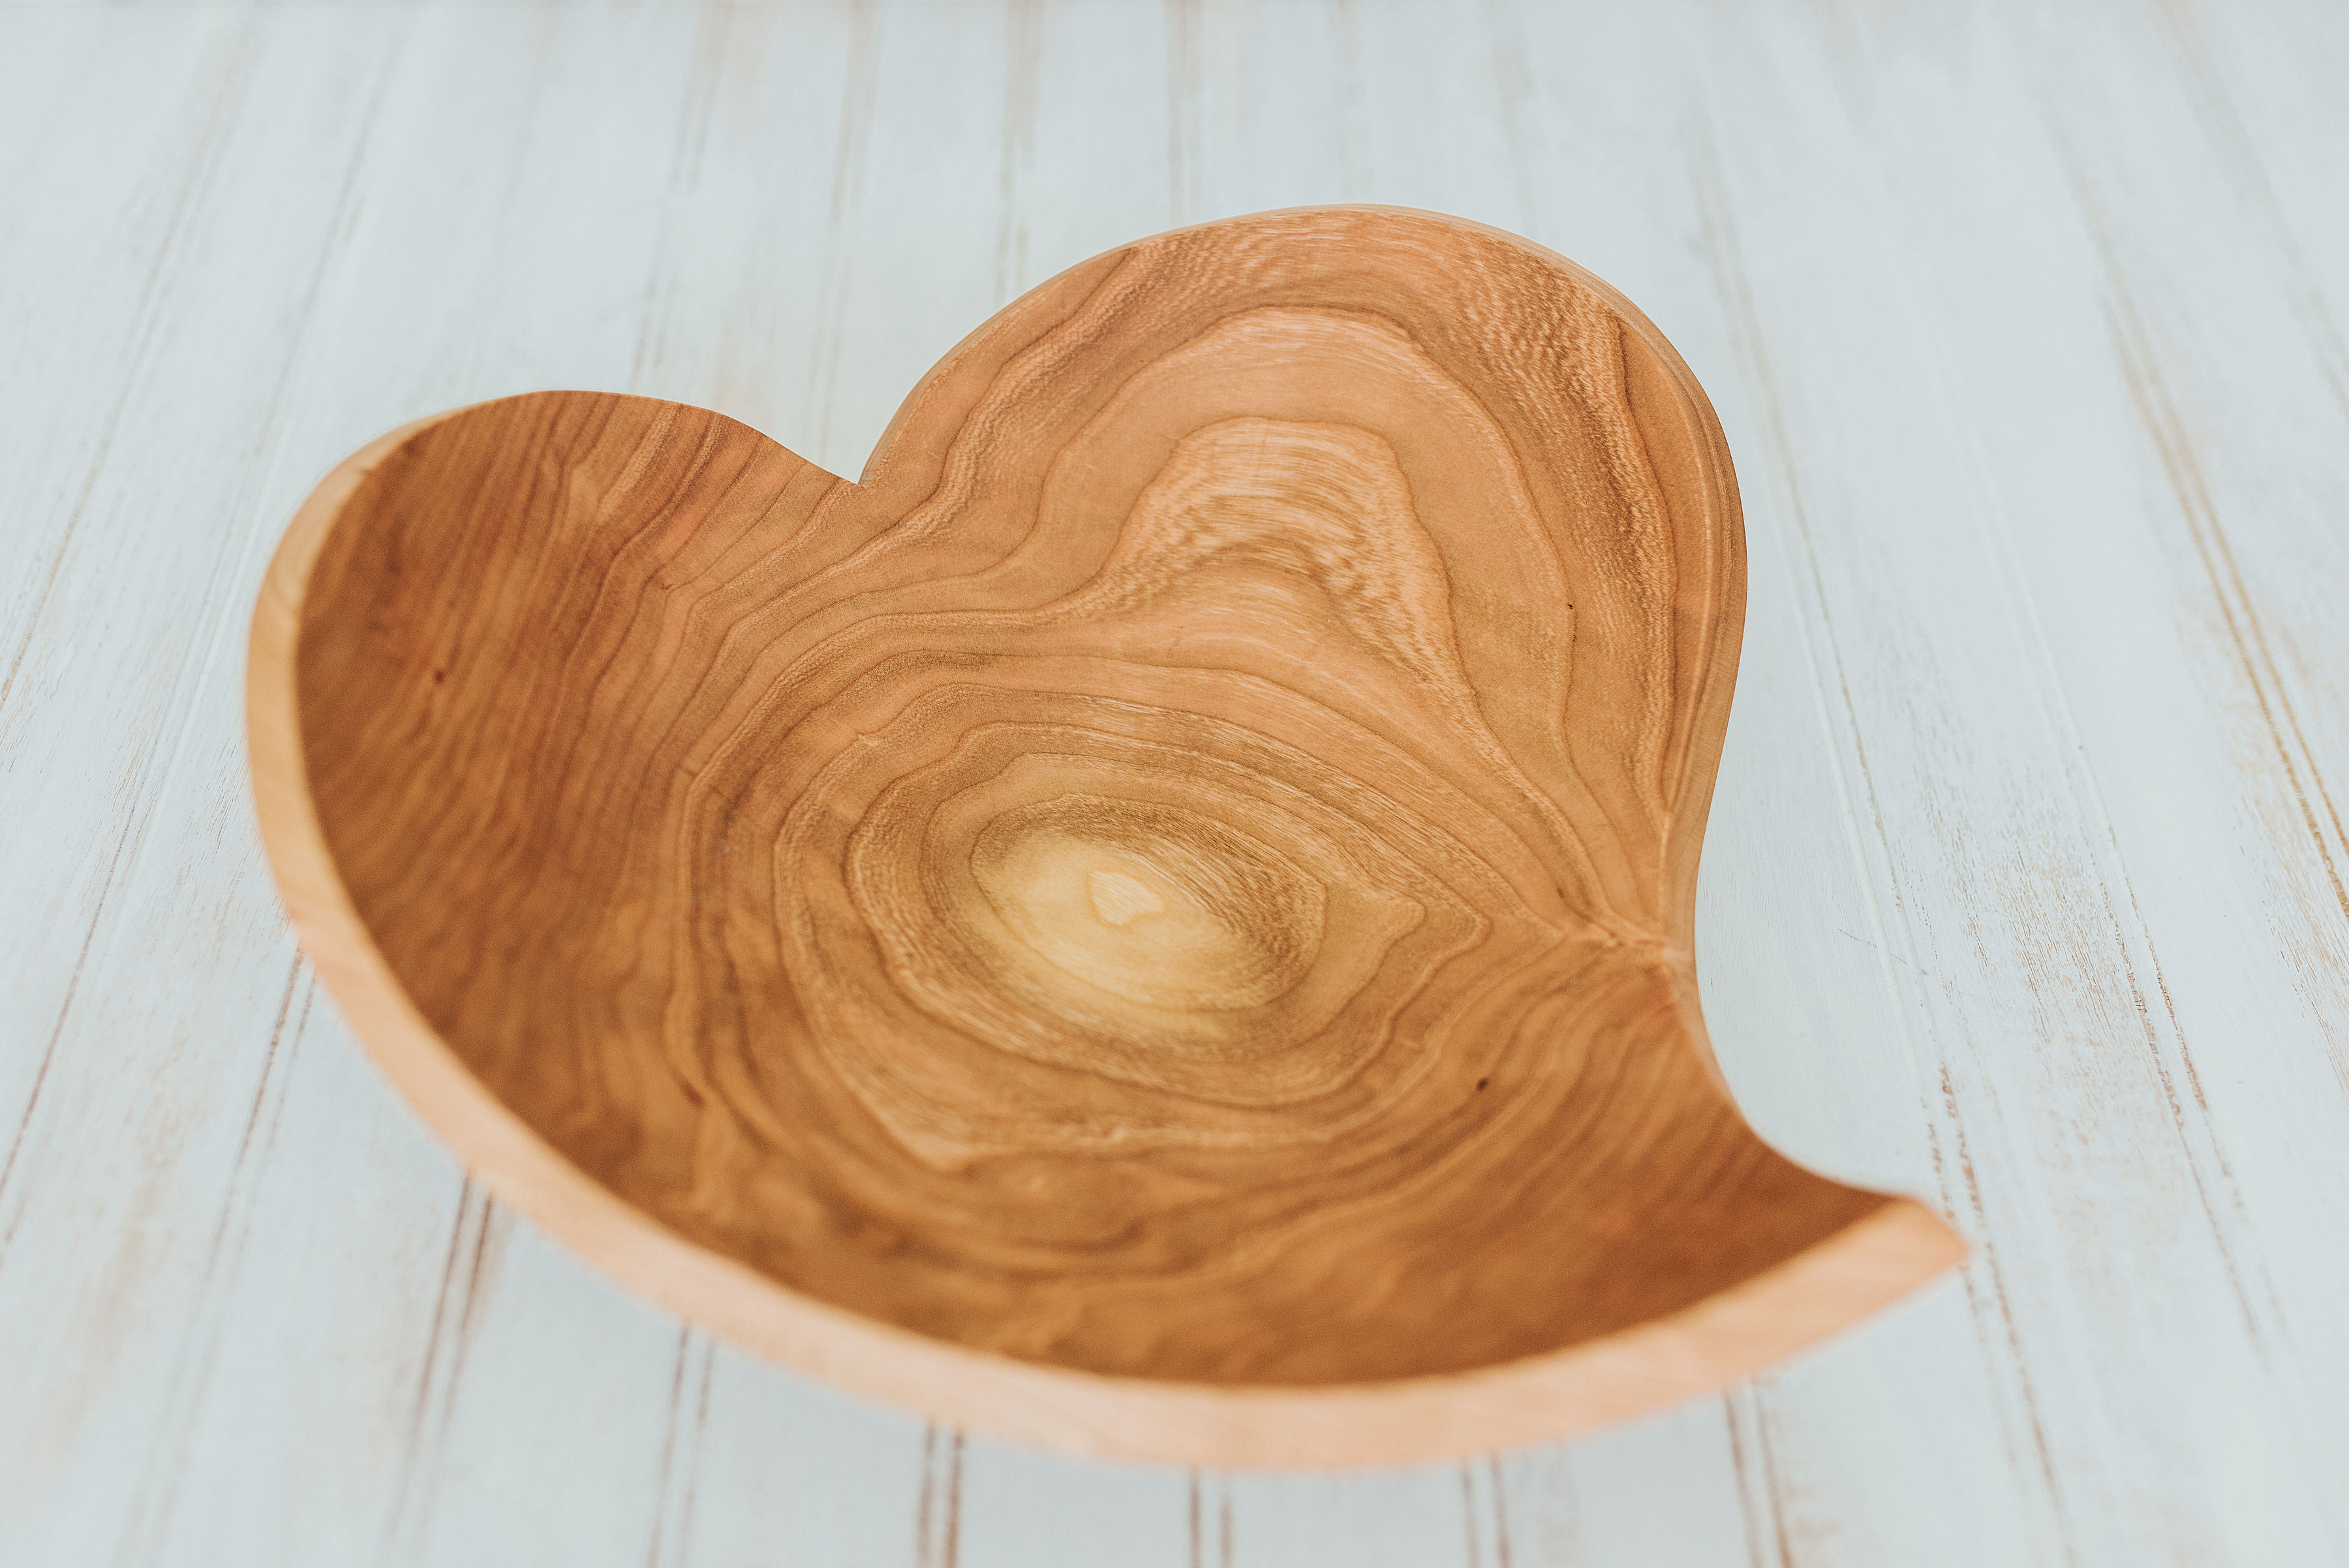 A teardrop heart bowl. Making wooden bowls can be an art form, one that takes time.